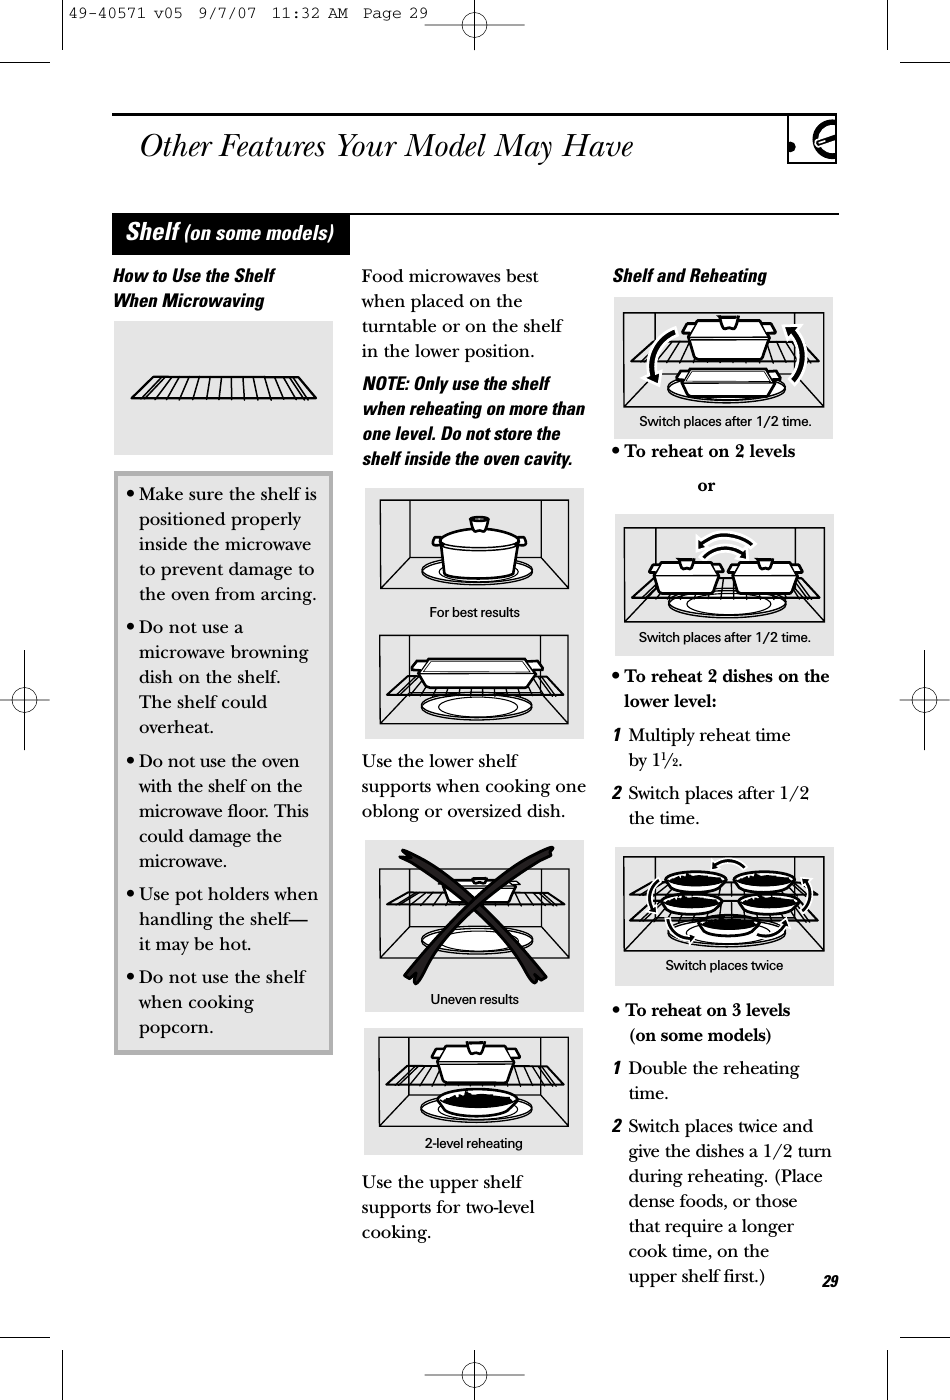 Other Features Your Model May Have29How to Use the ShelfWhen MicrowavingFood microwaves bestwhen placed on theturntable or on the shelf in the lower position.NOTE: Only use the shelfwhen reheating on more thanone level. Do not store theshelf inside the oven cavity.Use the lower shelfsupports when cooking oneoblong or oversized dish.Use the upper shelfsupports for two-levelcooking.Shelf and Reheating•To reheat on 2 levelsor•To reheat 2 dishes on thelower level:1Multiply reheat time by 11/2.2Switch places after 1/2the time.• To reheat on 3 levels (on some models)1Double the reheatingtime.2Switch places twice andgive the dishes a 1/2 turnduring reheating. (Placedense foods, or those that require a longercook time, on the upper shelf first.)•Make sure the shelf is positioned properly inside the microwave to prevent damage to the oven from arcing.•Do not use amicrowave browningdish on the shelf. The shelf could overheat.•Do not use the ovenwith the shelf on themicrowave floor. Thiscould damage themicrowave.•Use pot holders when handling the shelf—it may be hot.•Do not use the shelf when cooking popcorn.For best resultsUneven results2-level reheatingShelf (on some models)Switch places after 1/2 time.Switch places after 1/2 time.Switch places twice49-40571 v05  9/7/07  11:32 AM  Page 29